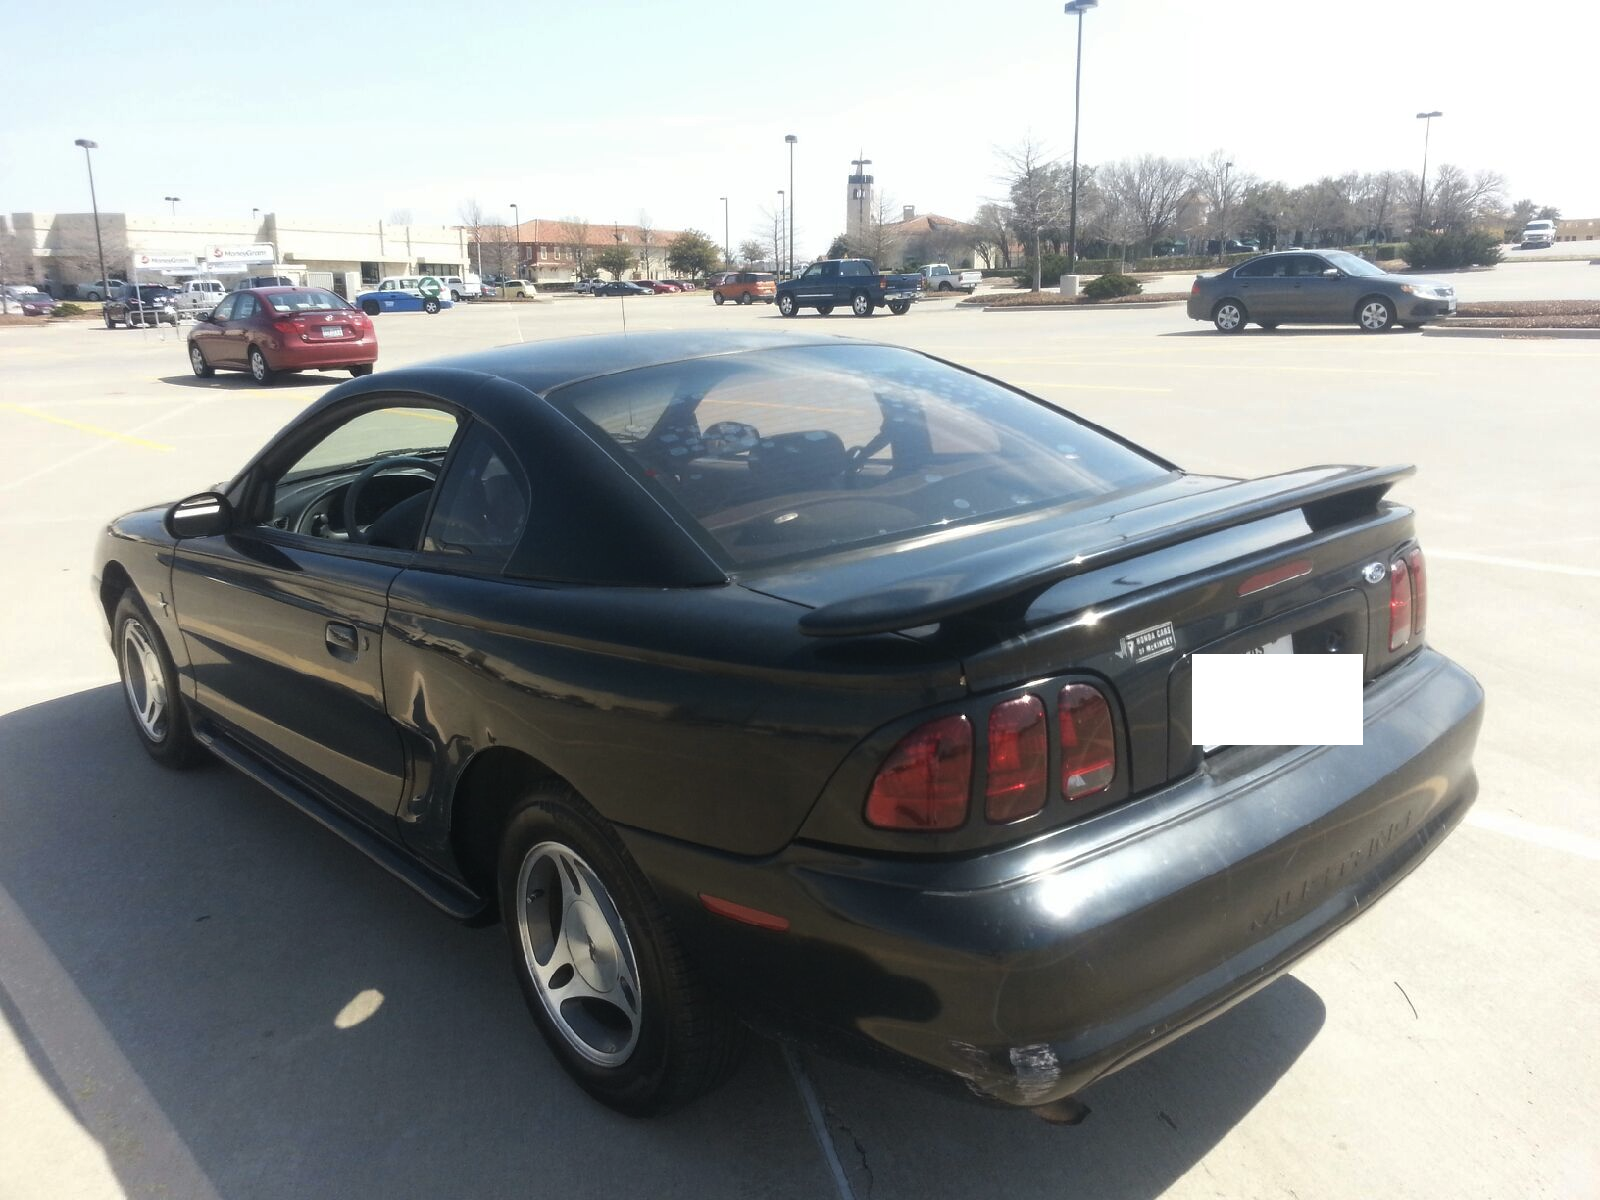 1998 Ford mustang coupe reviews #3